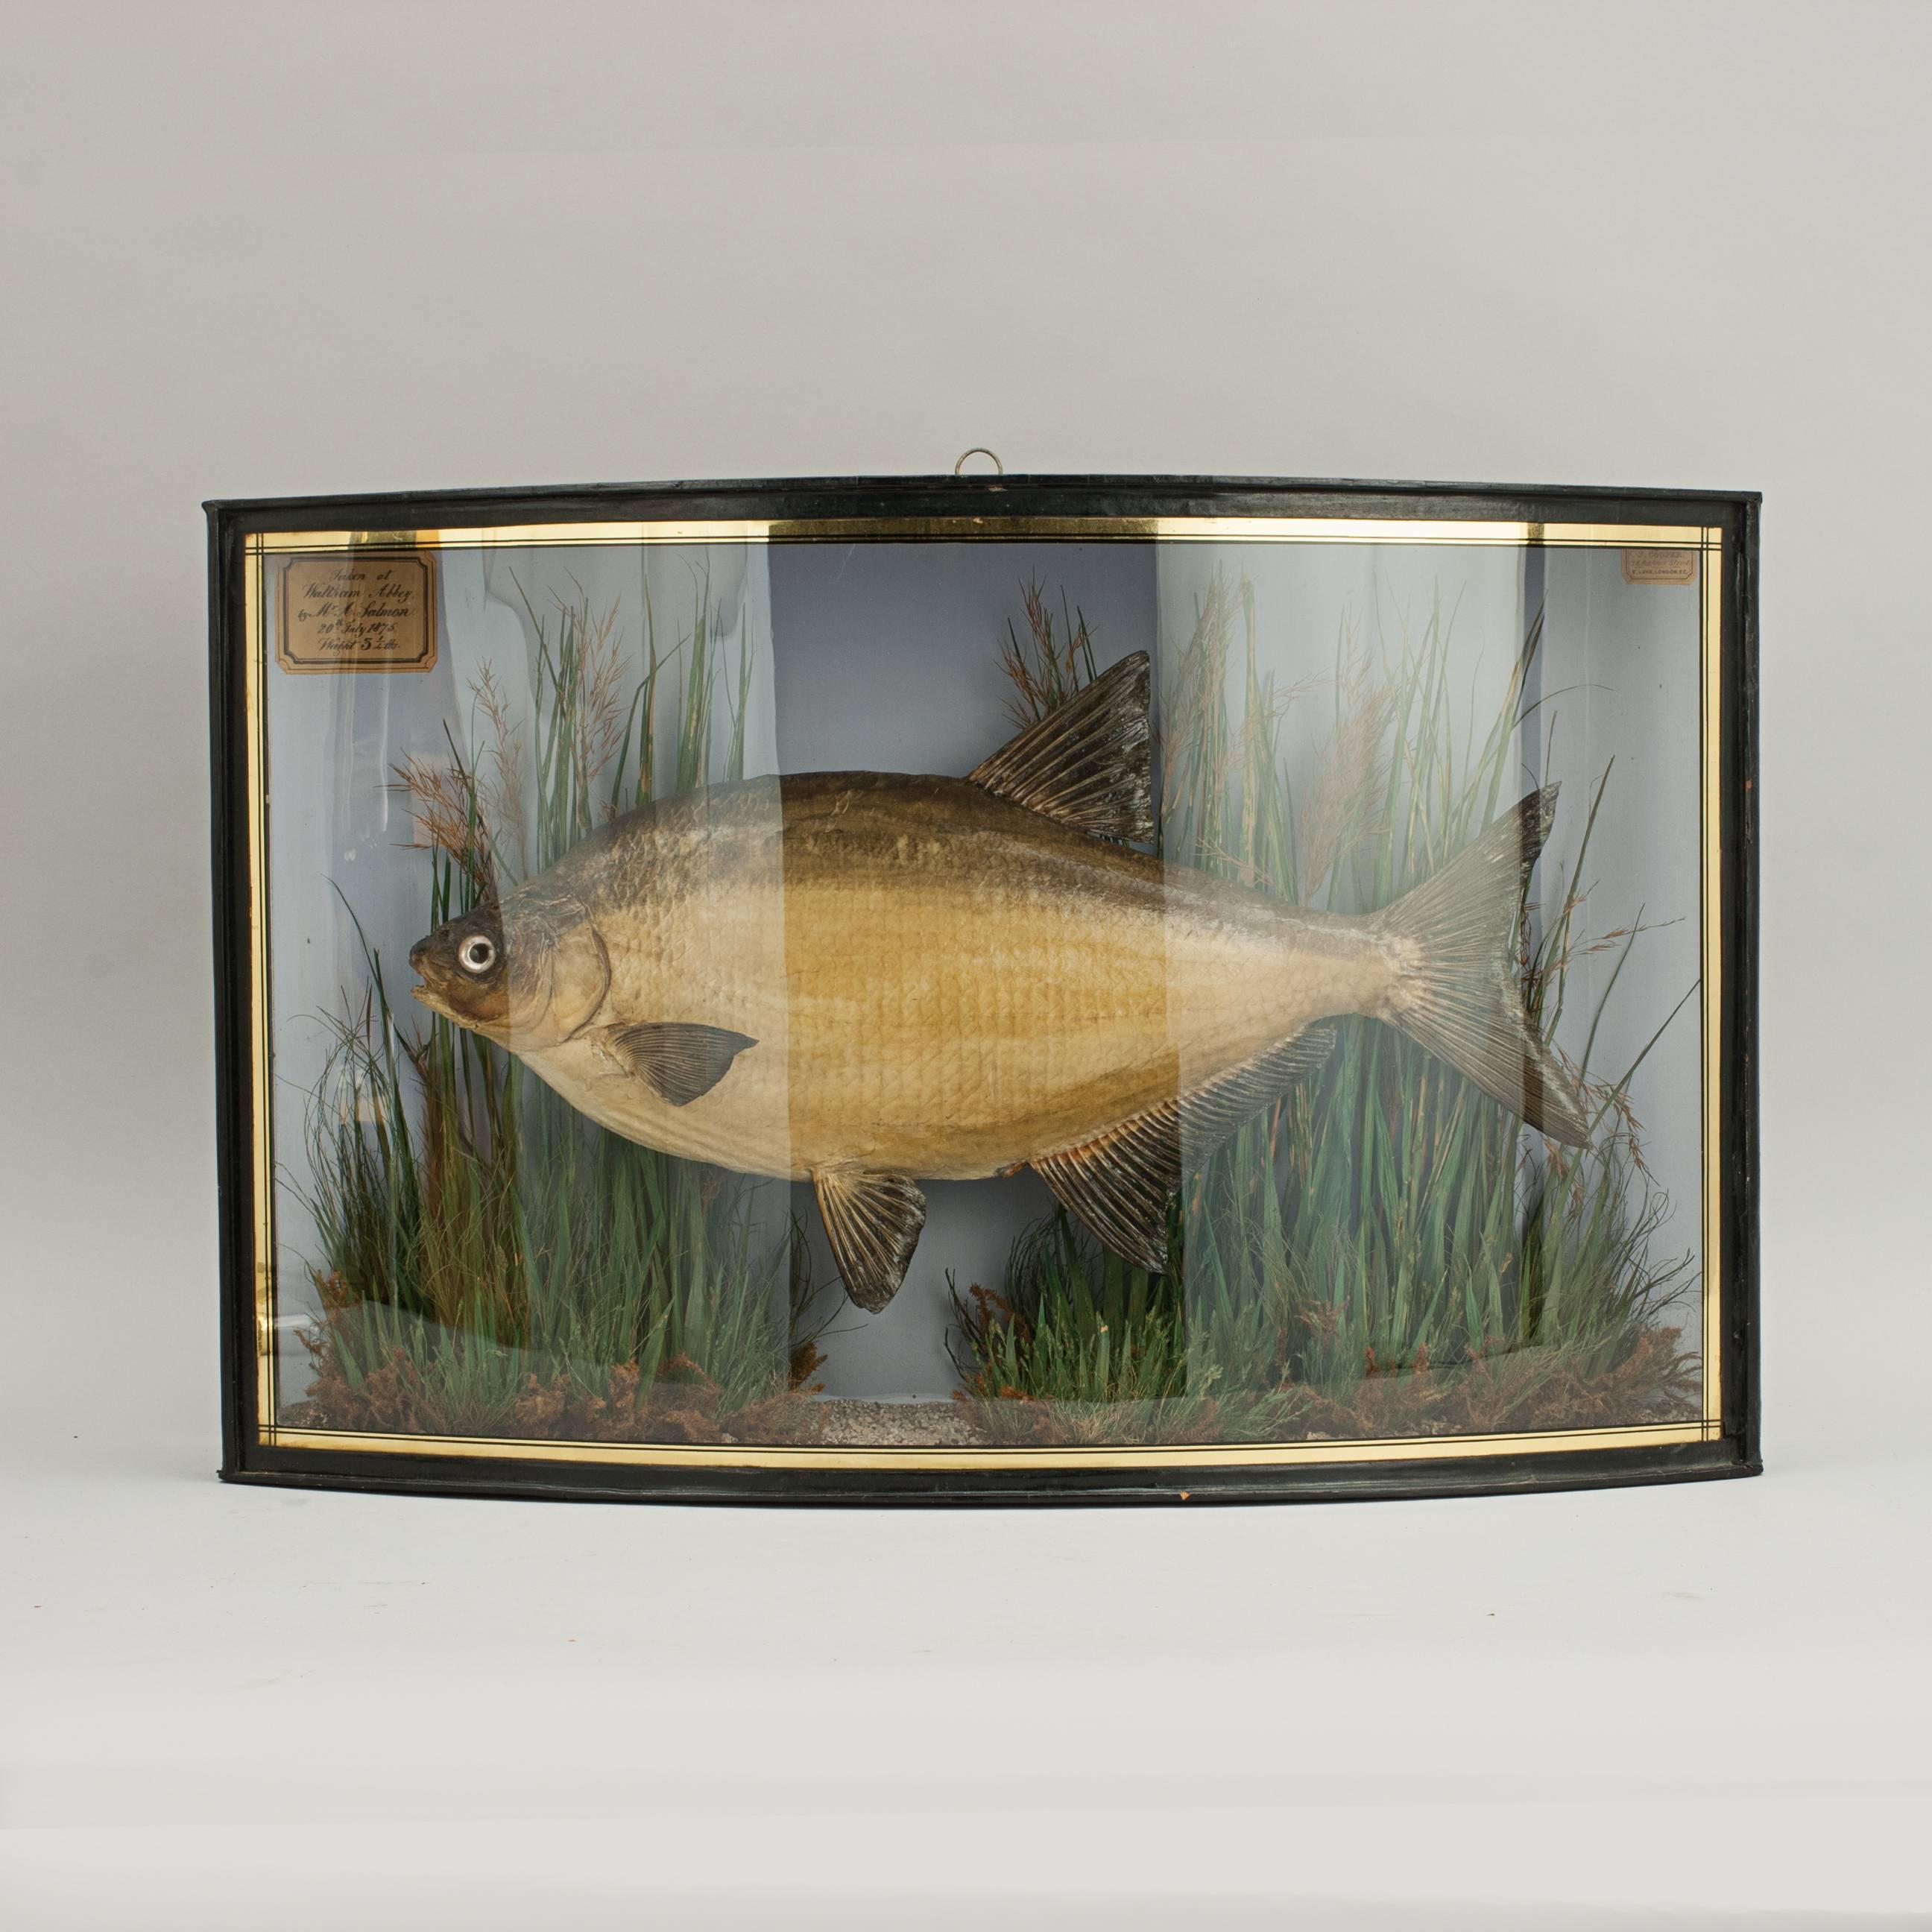 Animal Skin Taxidermy, Cased Bream by Cooper